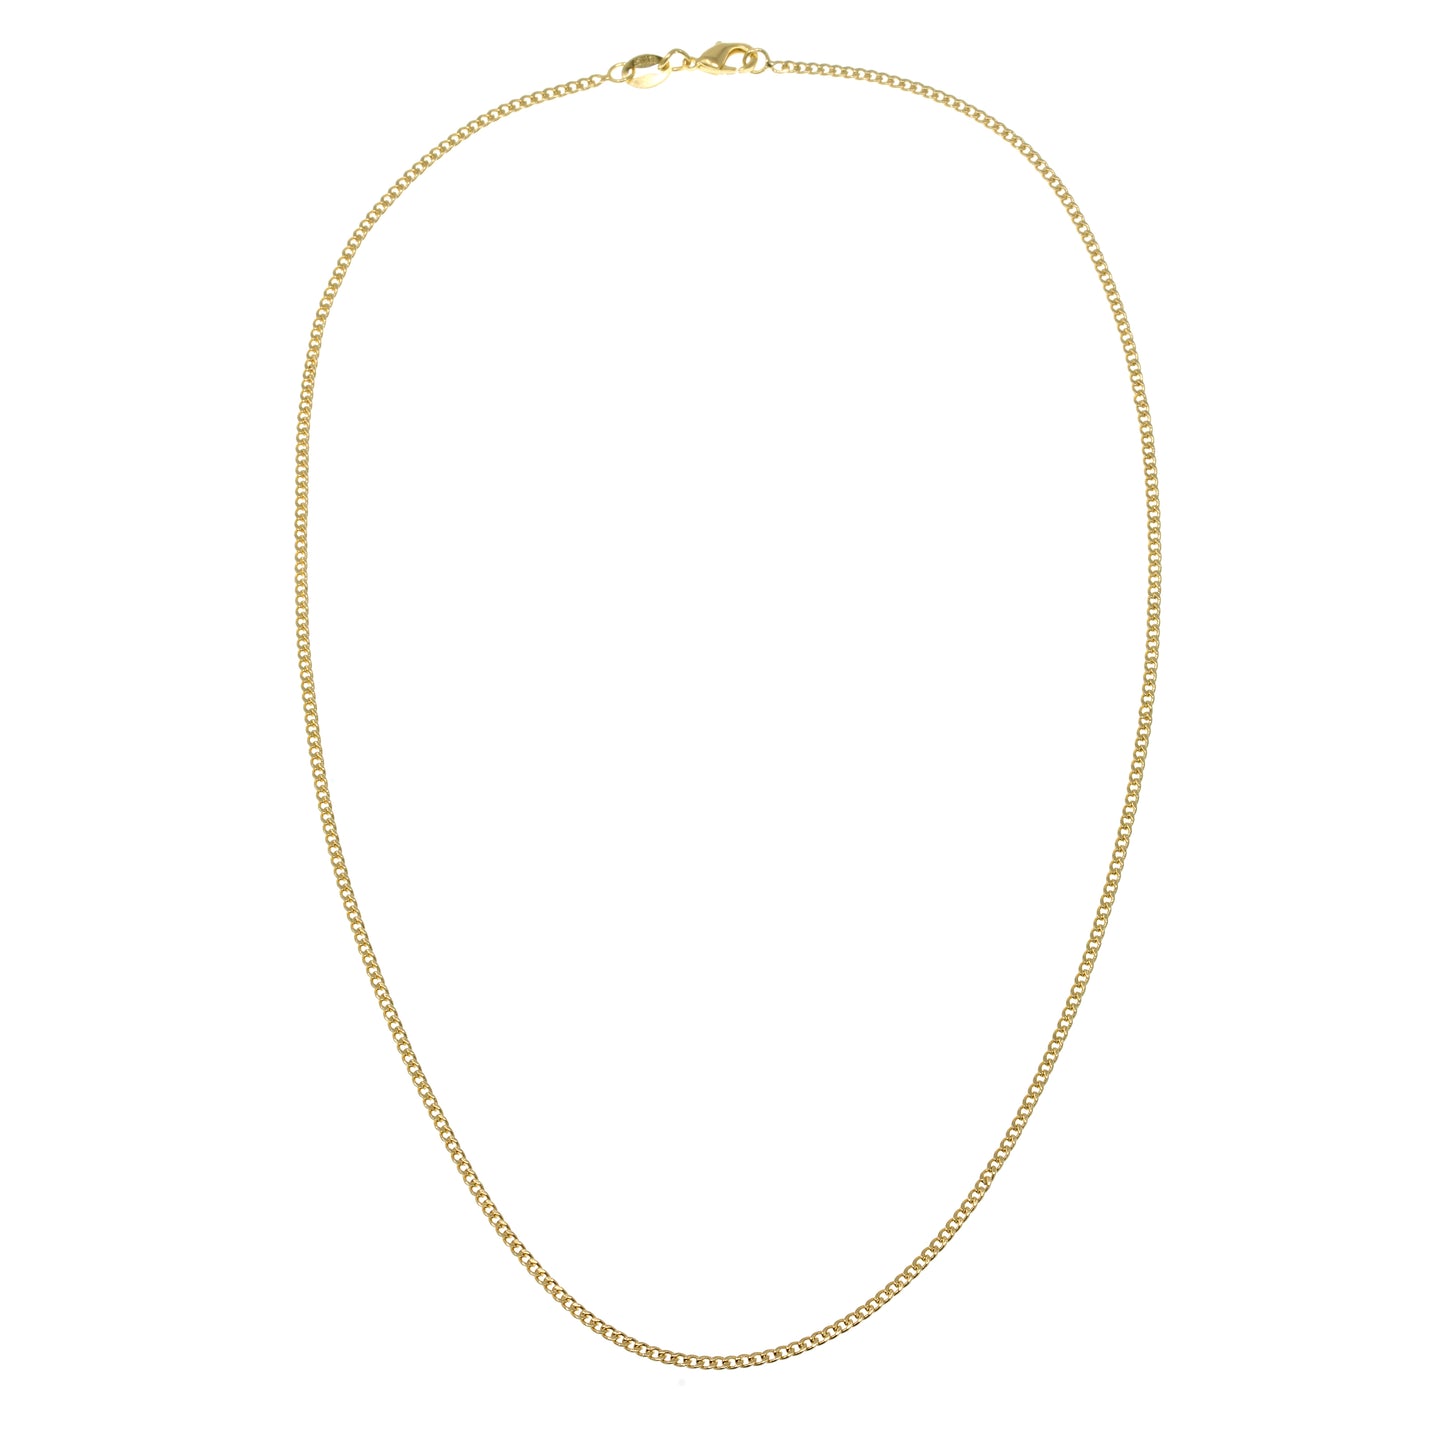 NGF-10/G - Gold-filled Chain Necklace